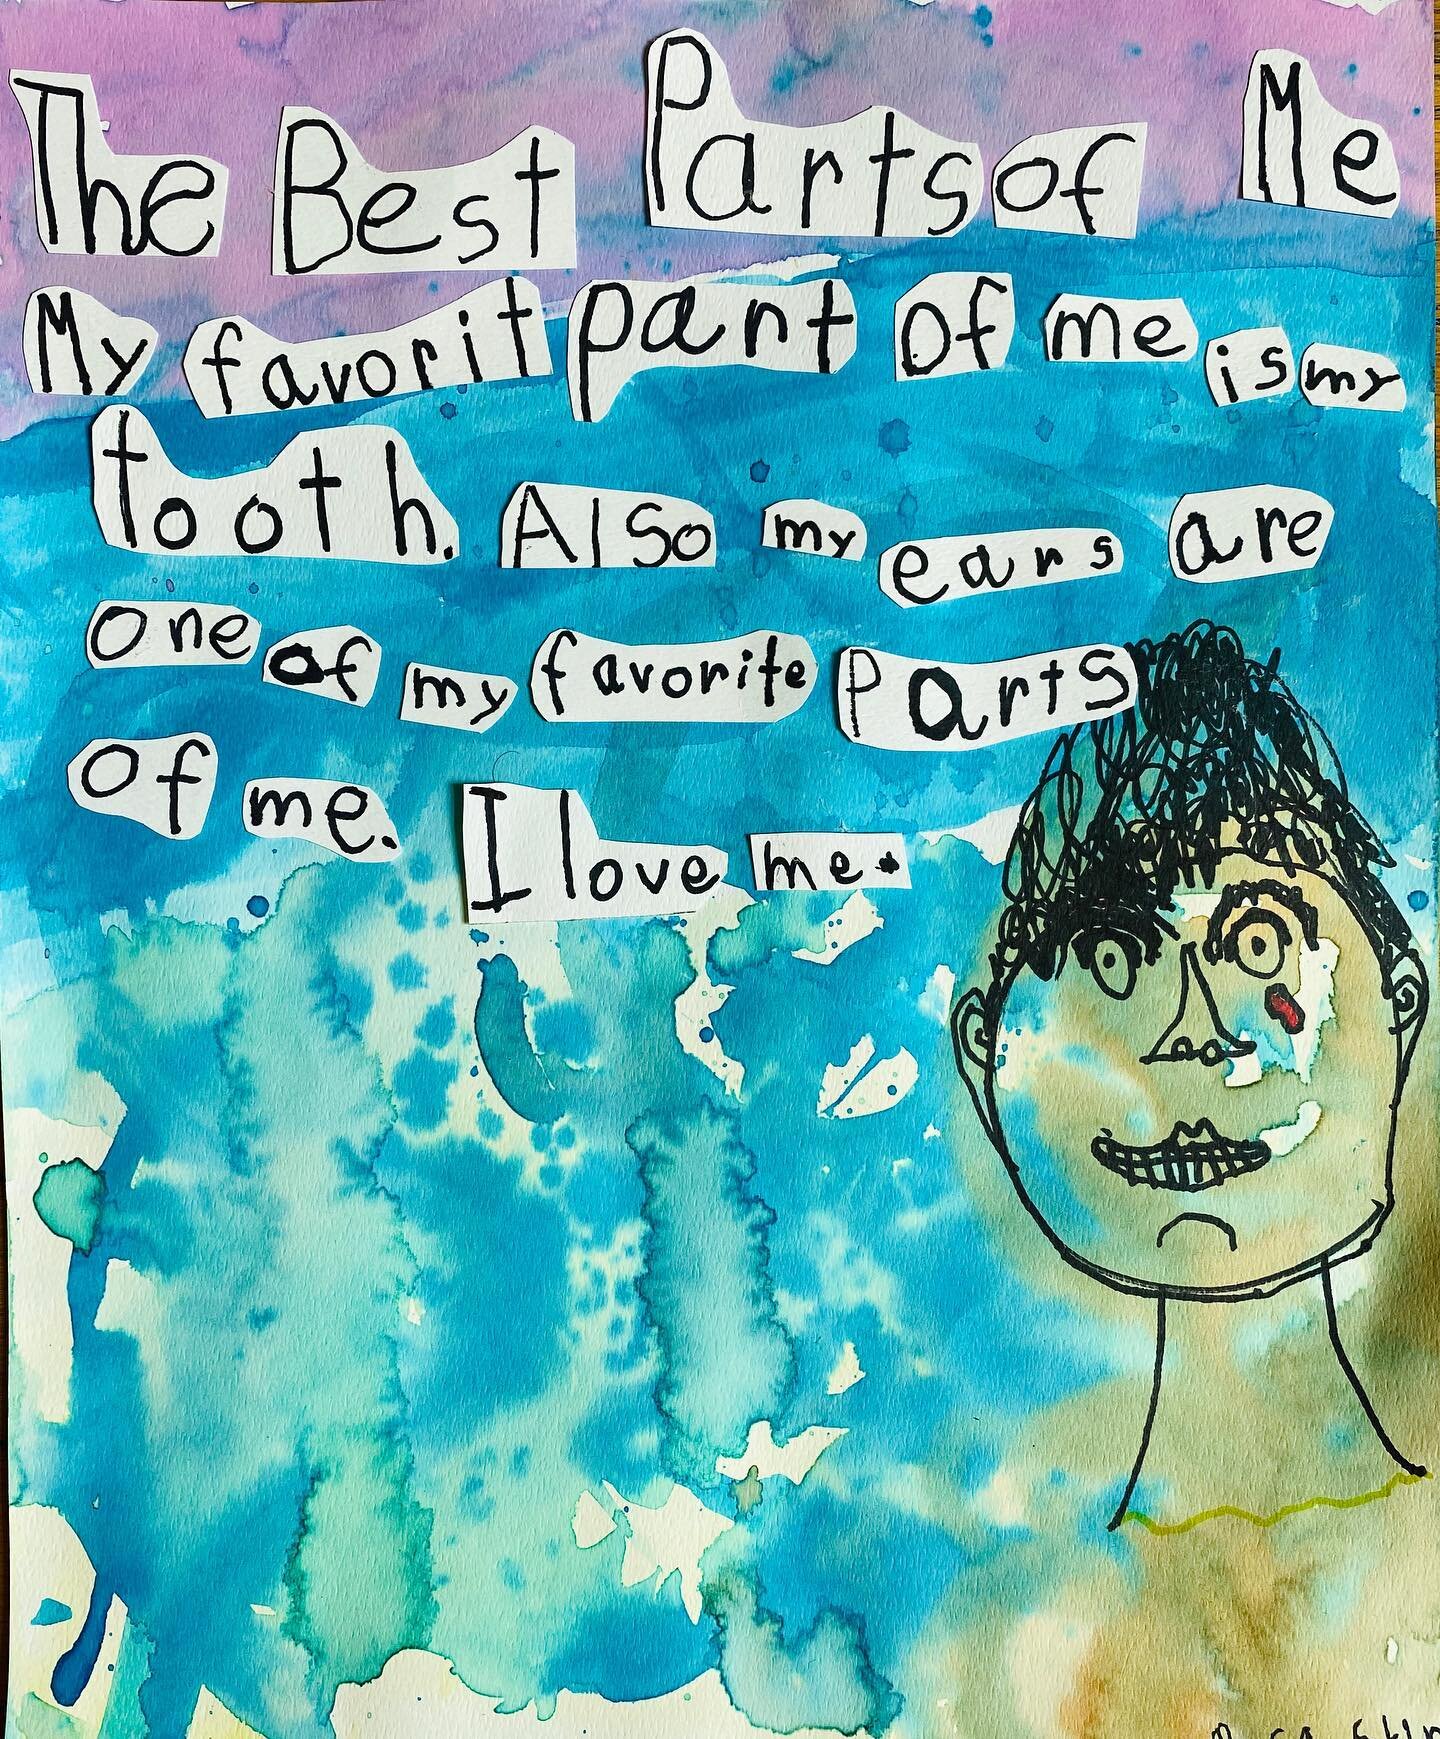 The Best Parts of Me Self-Portraits: Liquid watercolor paints, permanent markers on watercolor paper. What&rsquo;s your favorite part of you?
💫
I love listening to and observing the kids as they reflect on what&rsquo;s awesome about themselves. They